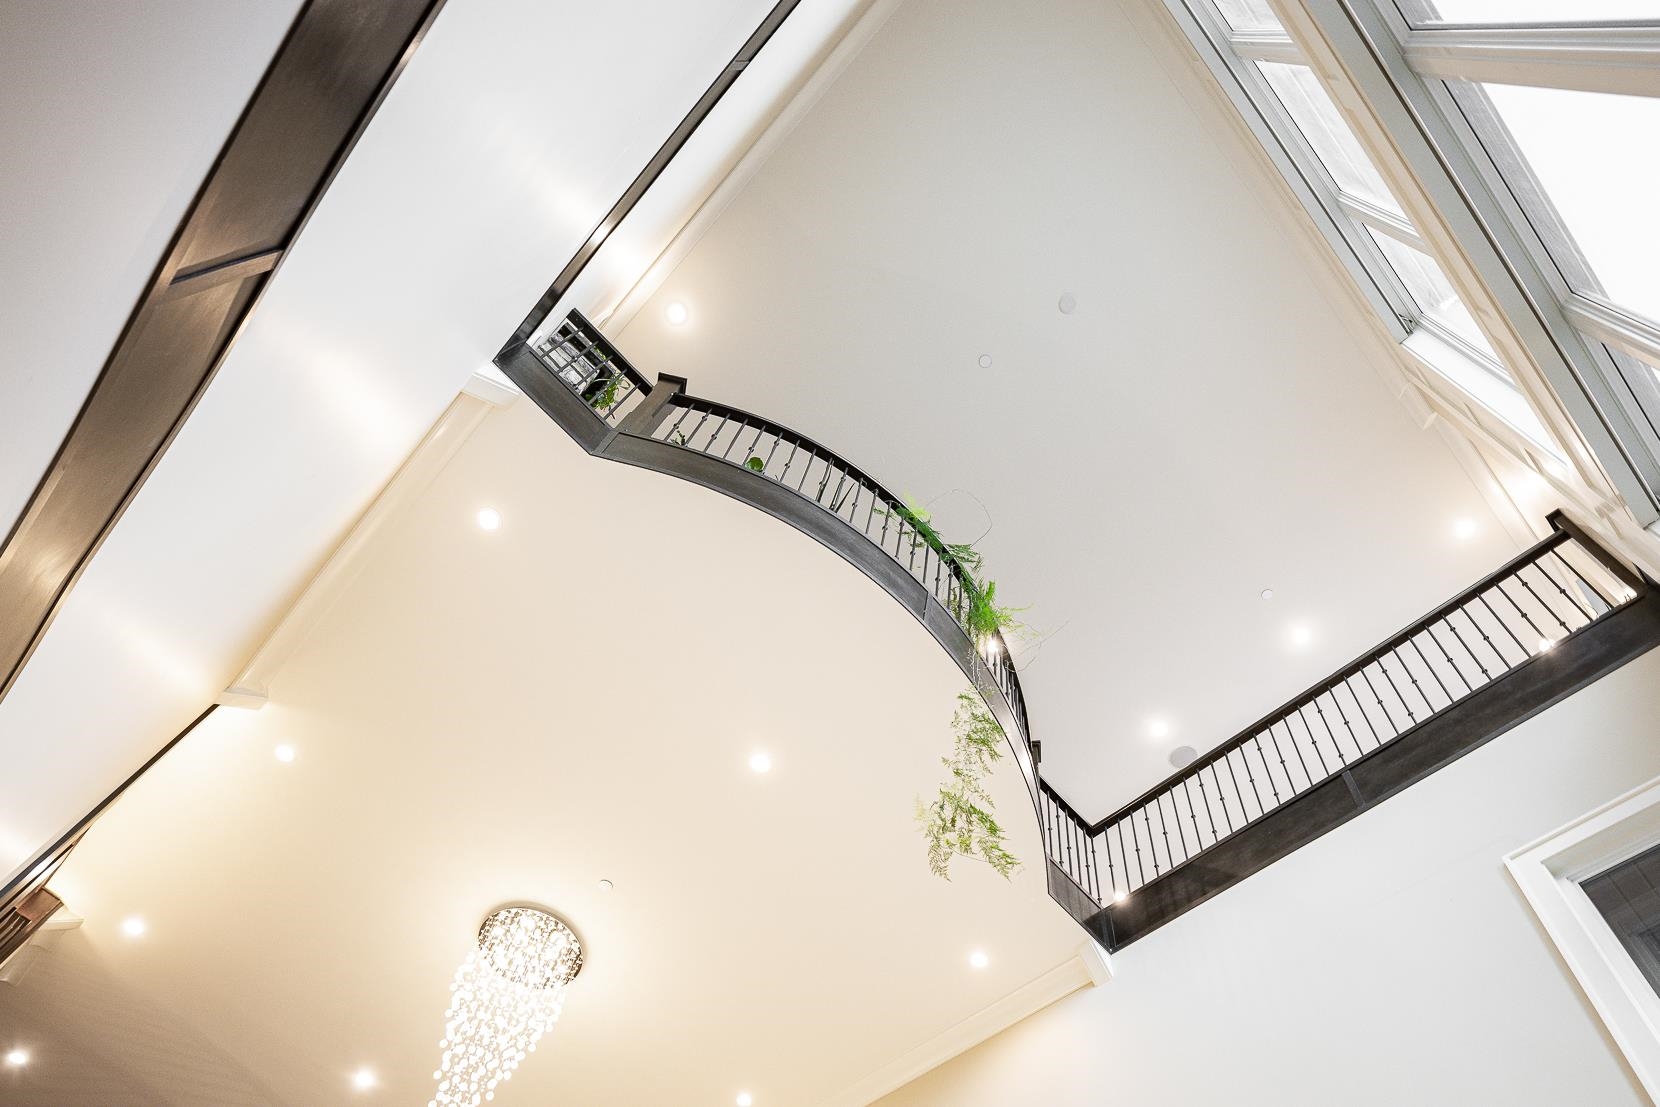 Step into the breathtaking luxury of the 50ft tall grand foyer